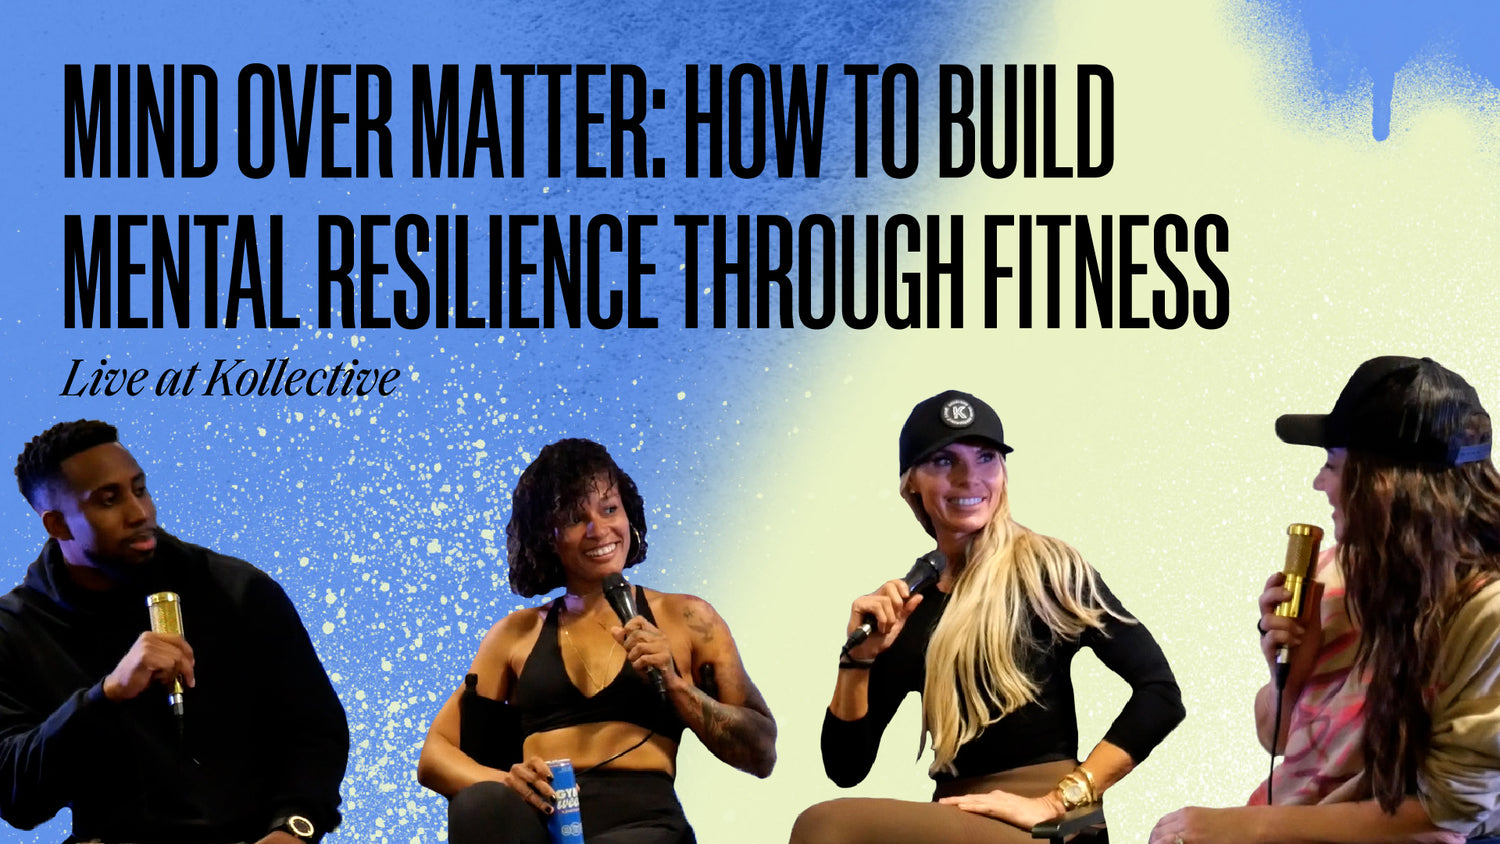 53. Mind Over Matter: How to Build Mental Resilience through Fitness (Live at Kollective)